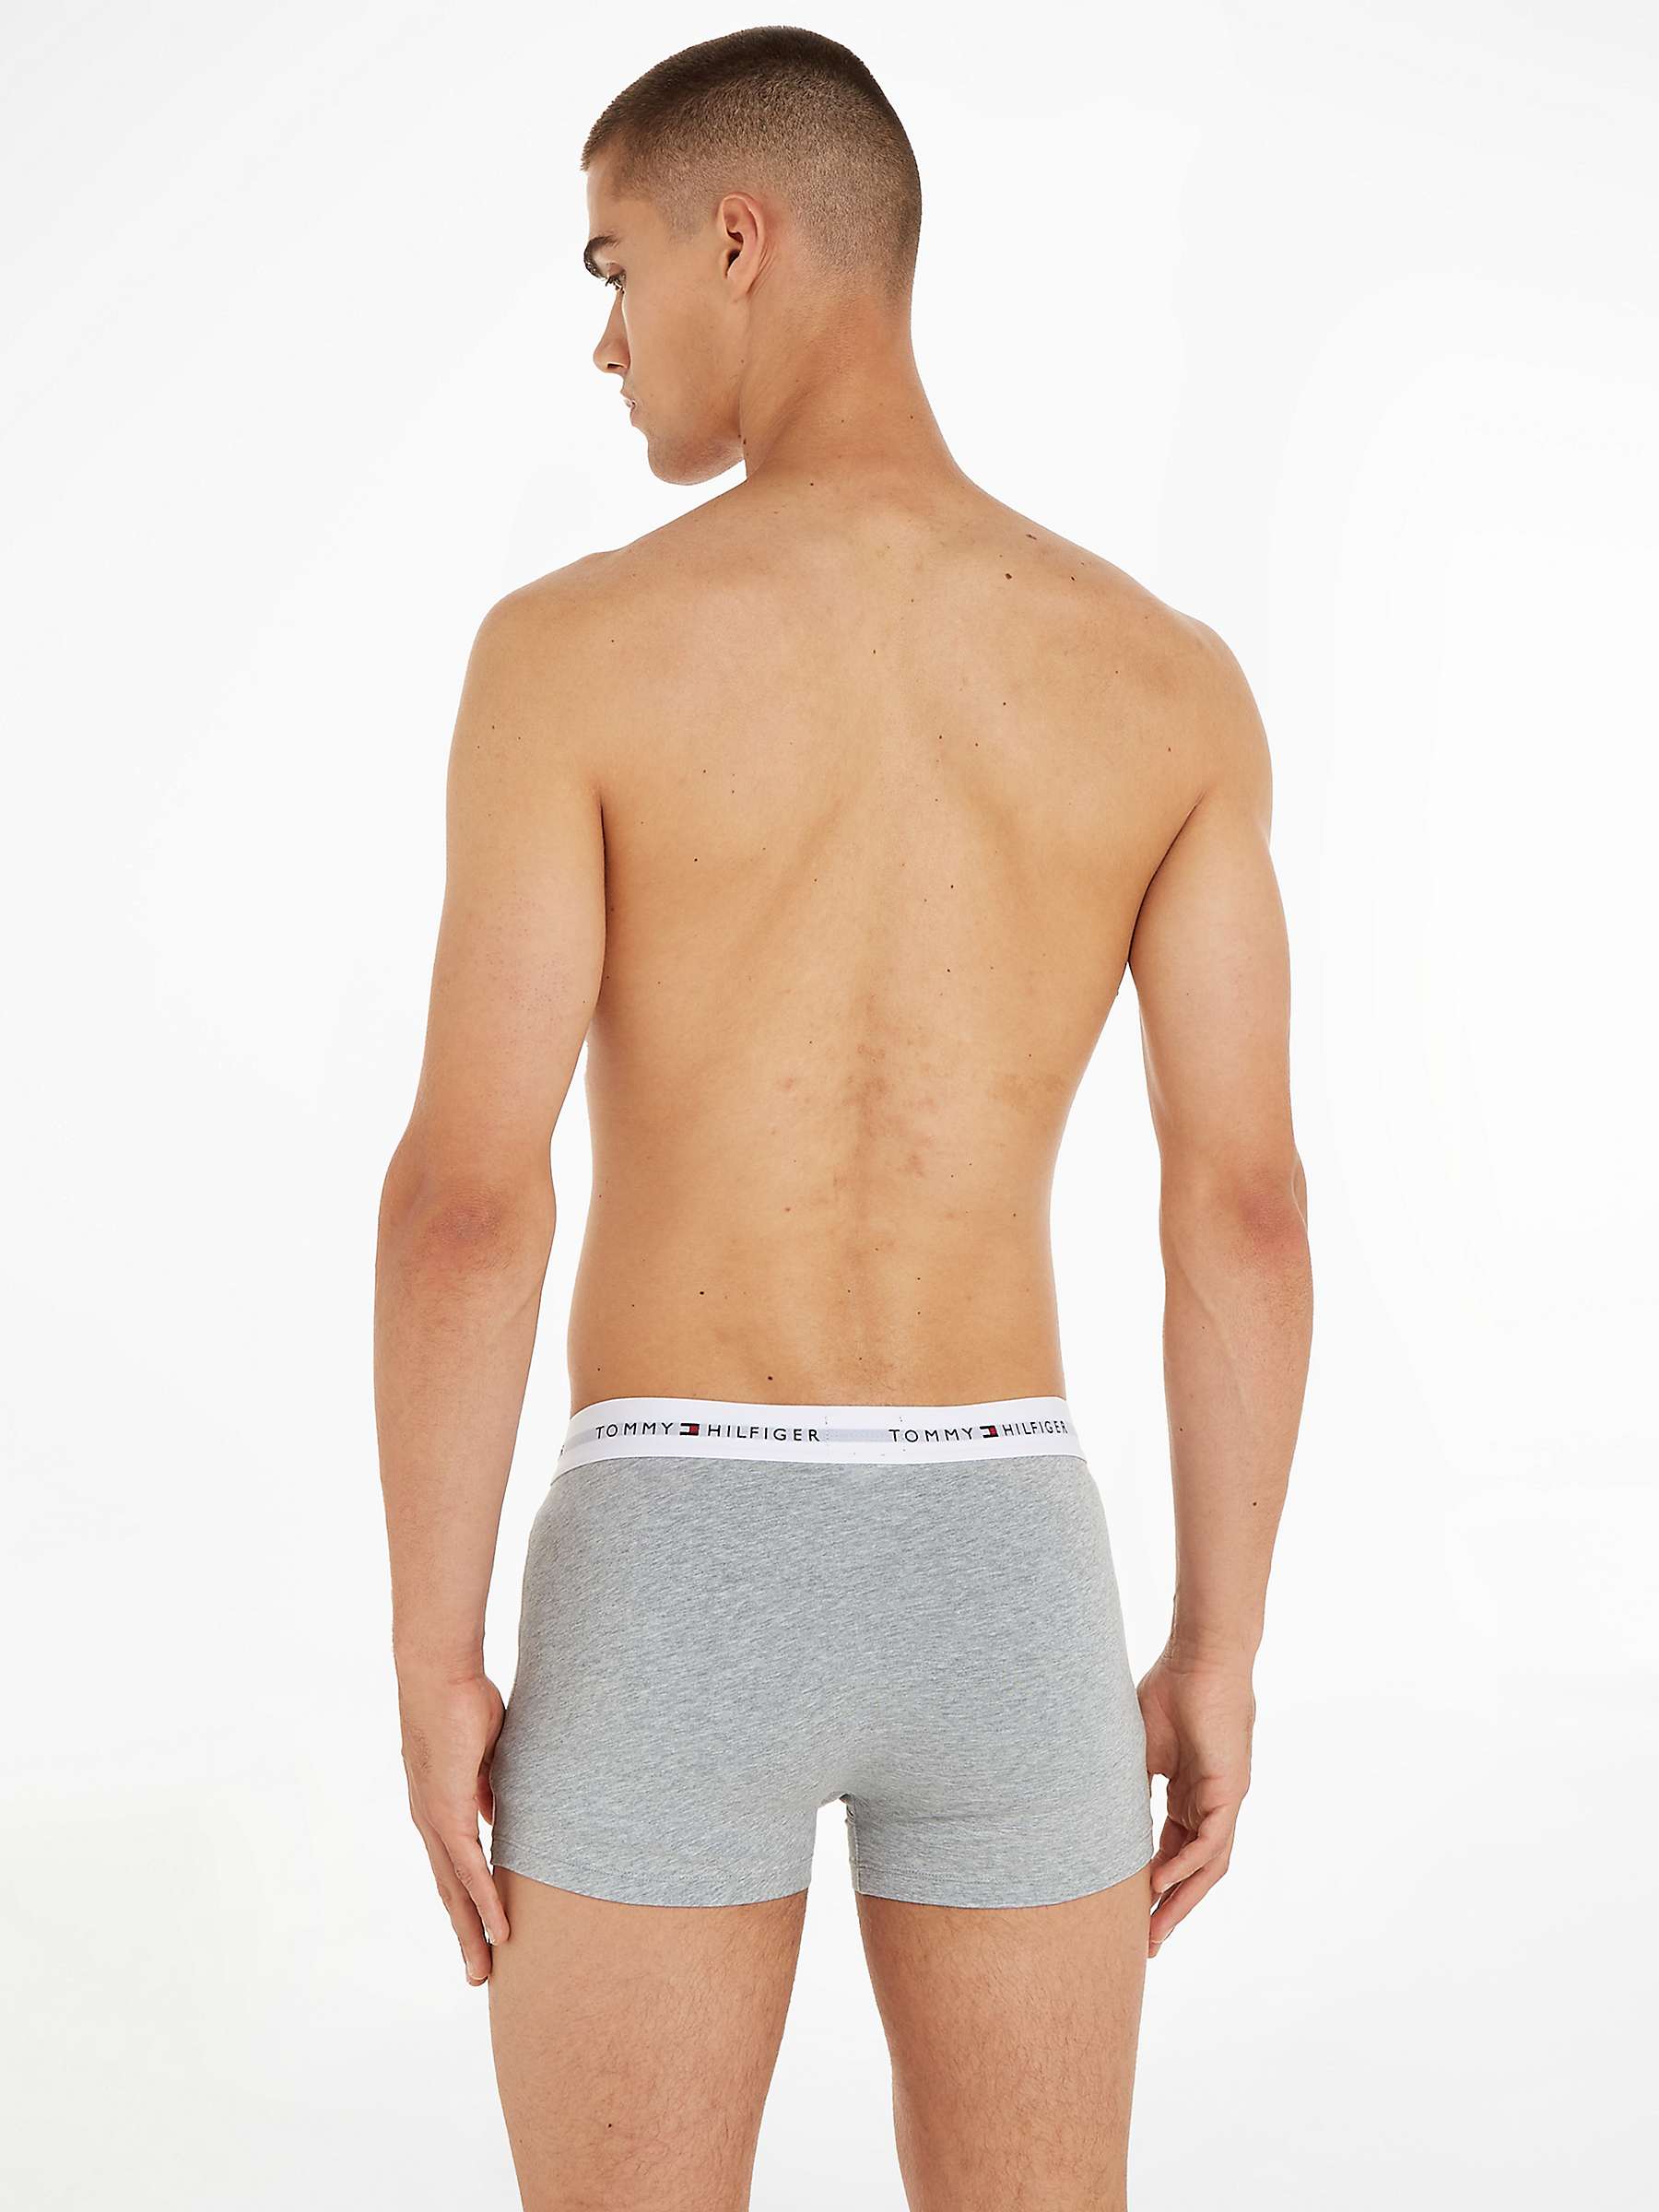 Buy Tommy Hilfiger Essential Logo Waistband Trunks, Pack of 3, Grey/Black/White Online at johnlewis.com